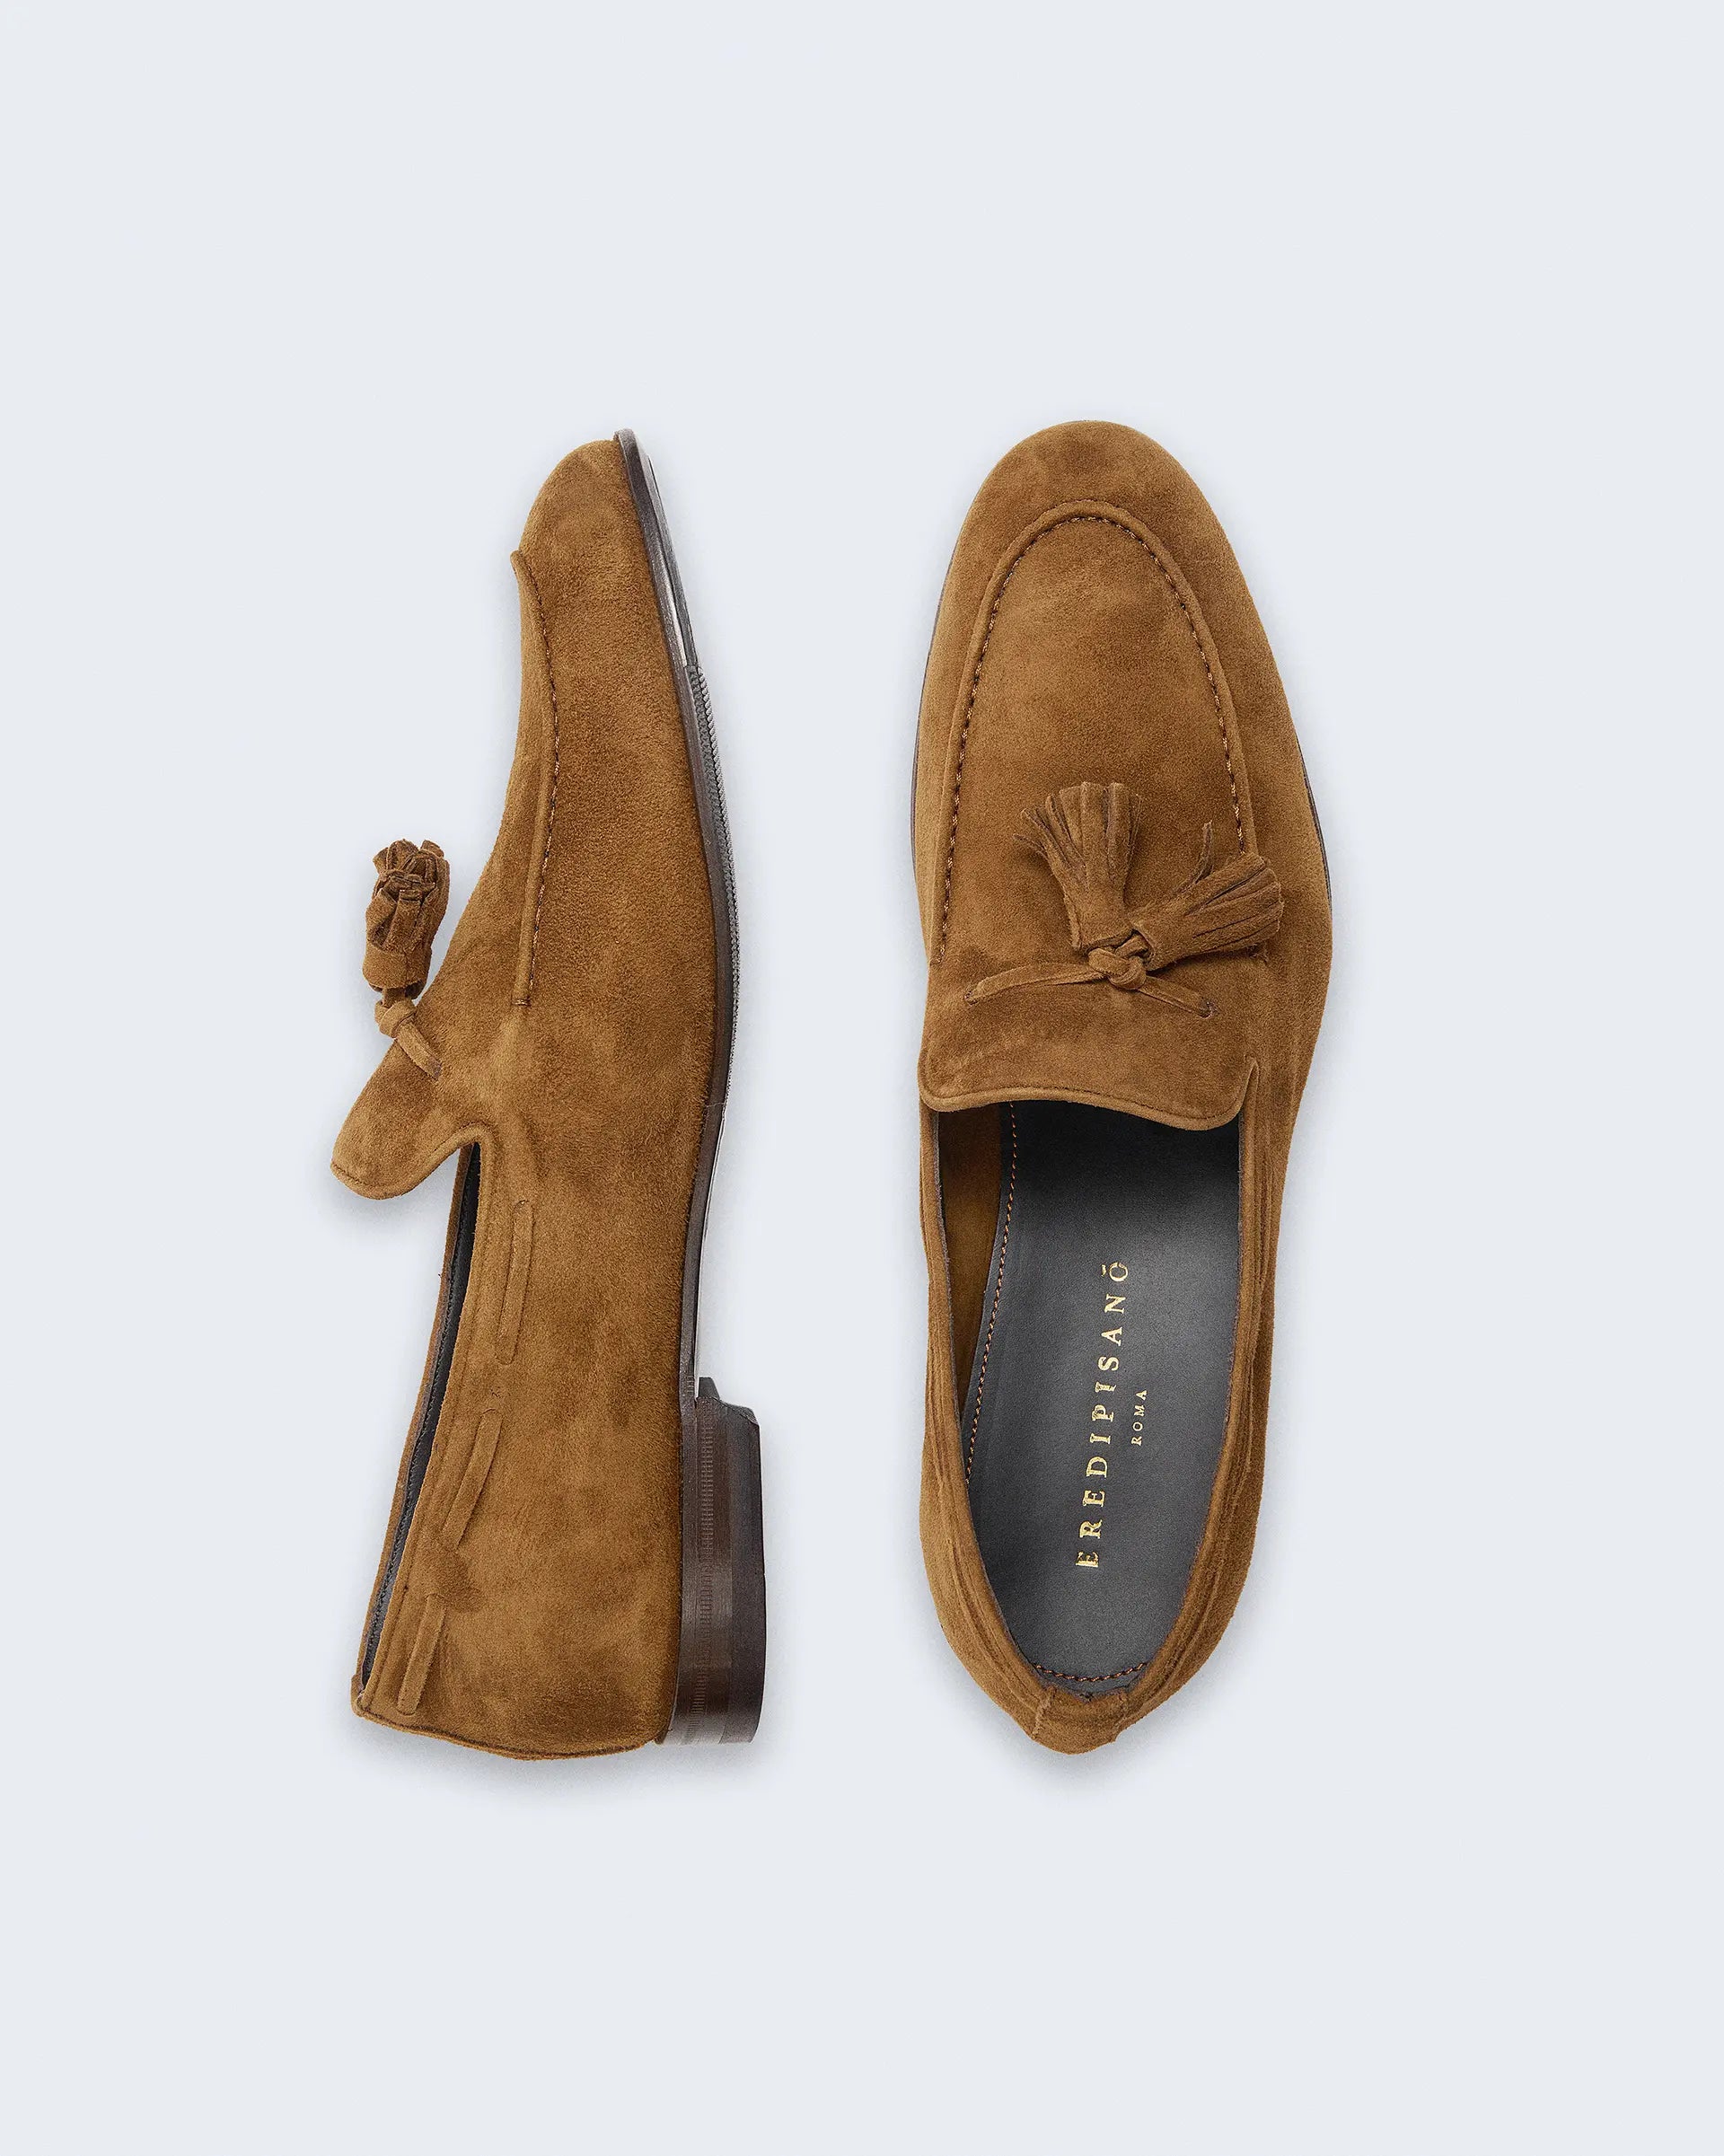 Moccasin with walnut tassels in light suede